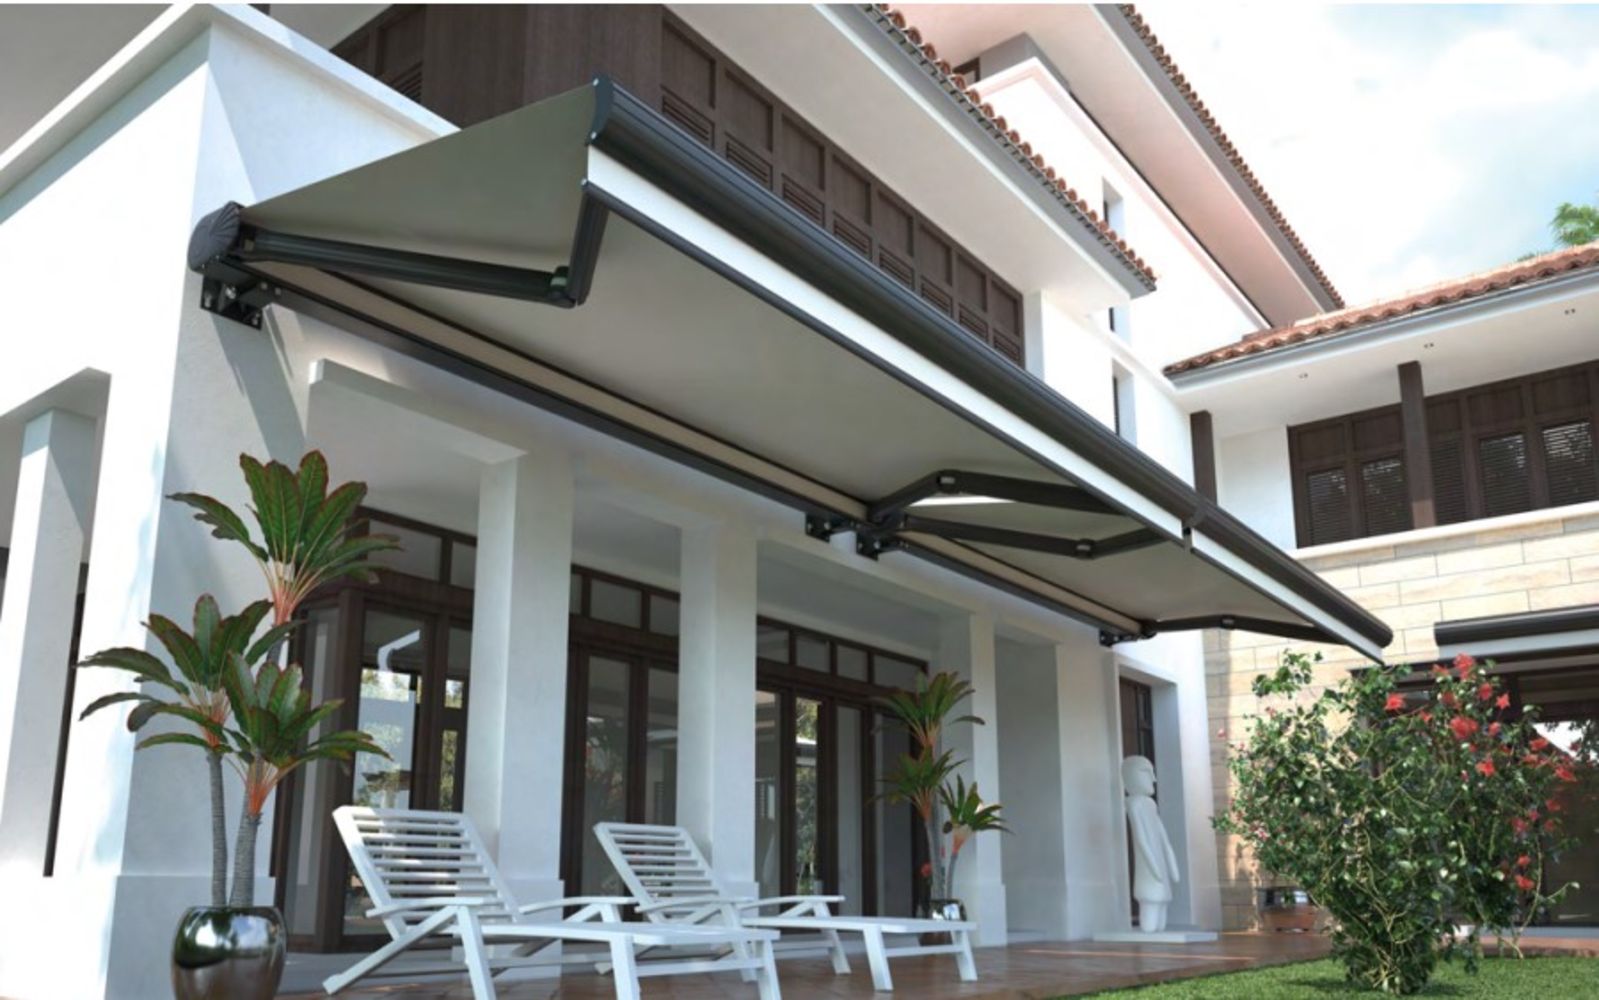 Brand new High quality electrical retractable awnings as sold in Costco at low prices and reduced buyers premium